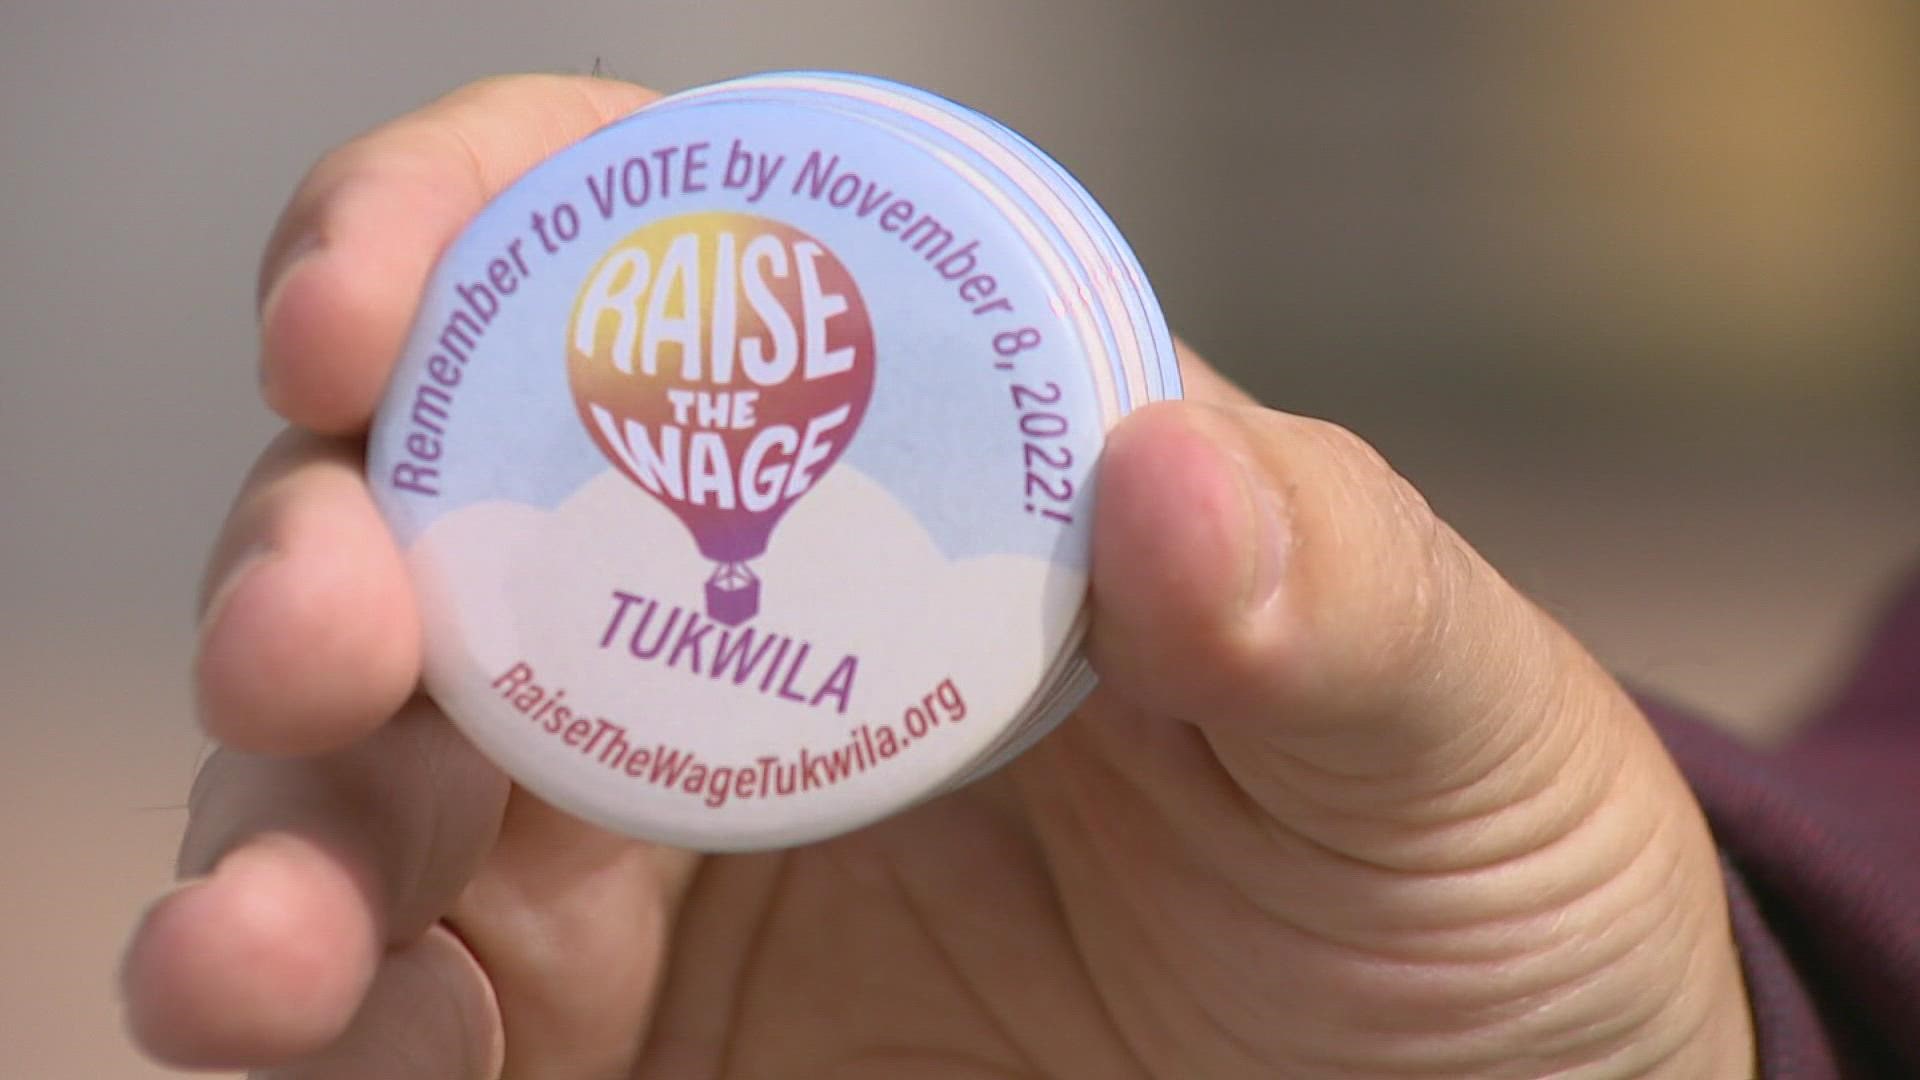 If approved, the initiative would put Tukwila's minimum wage on par with those in neighboring cities like Seattle and Seatac.